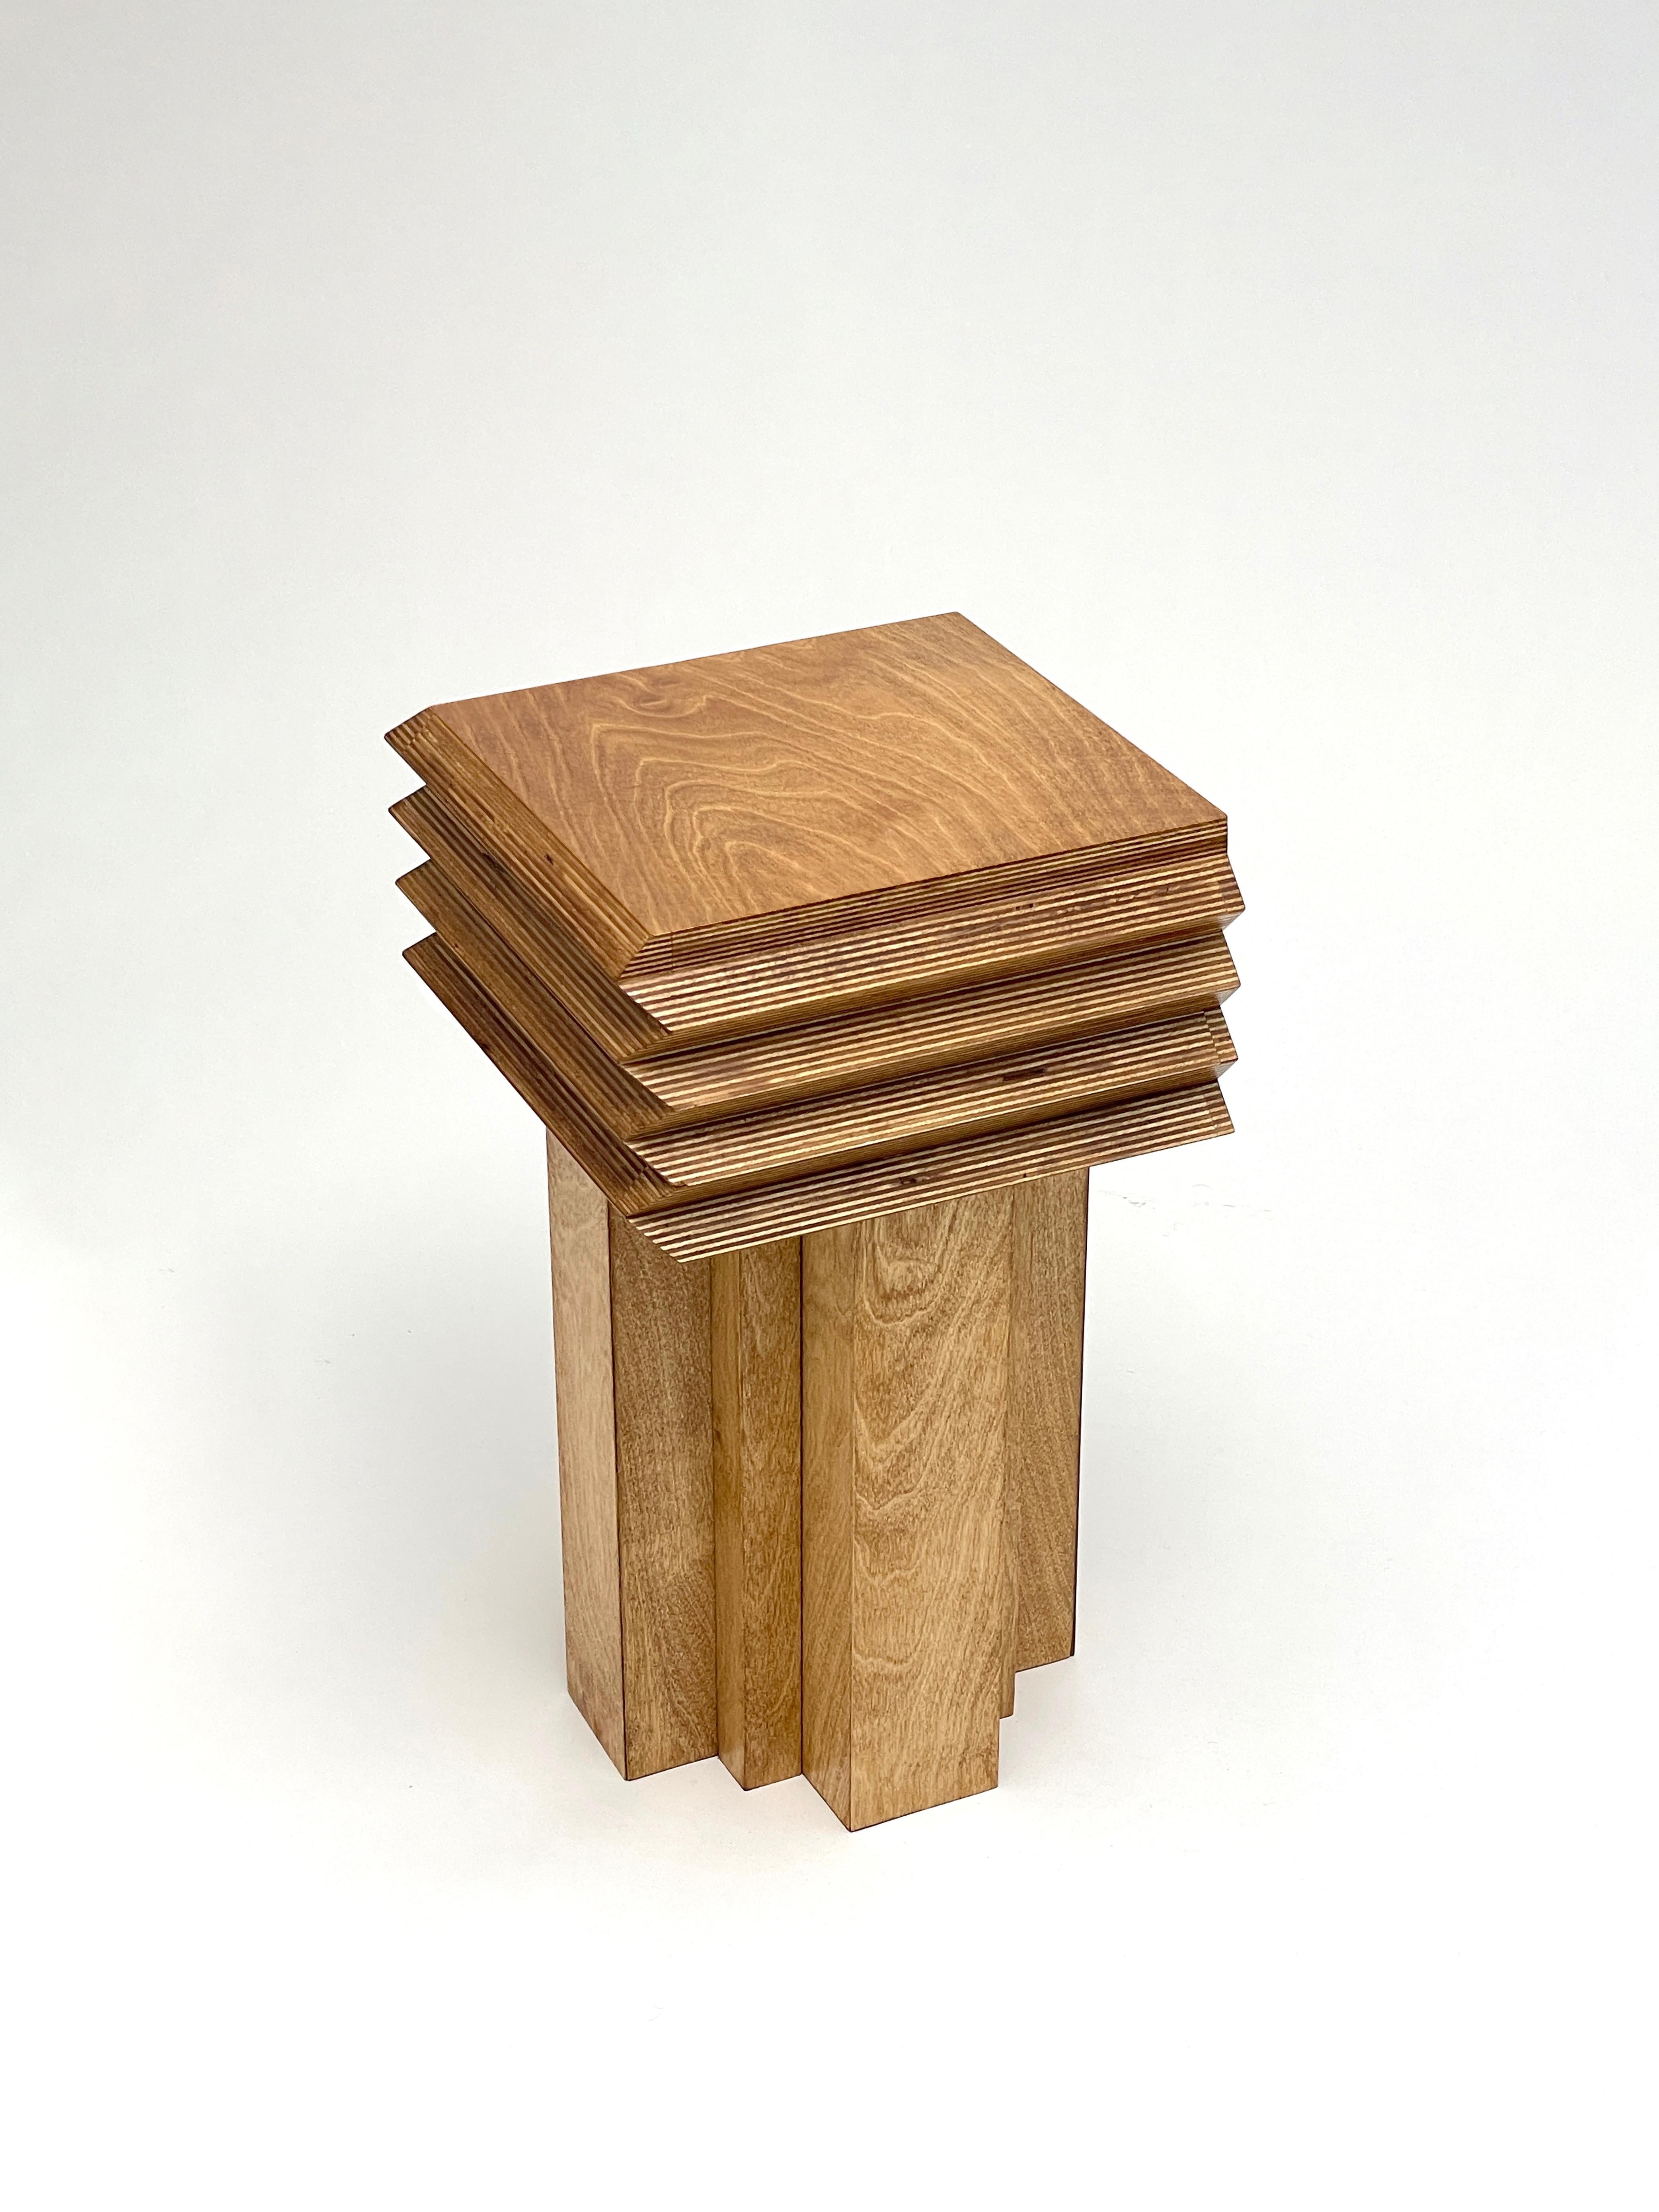 MM stool by Goons
Dimensions: W 30 x D 30 x H 54 cm.
Materials: Wood.
Dimensions can be adjusted +/- 10 cm. 

Goons is located in Paris, France. All of their designs are made out of wood.